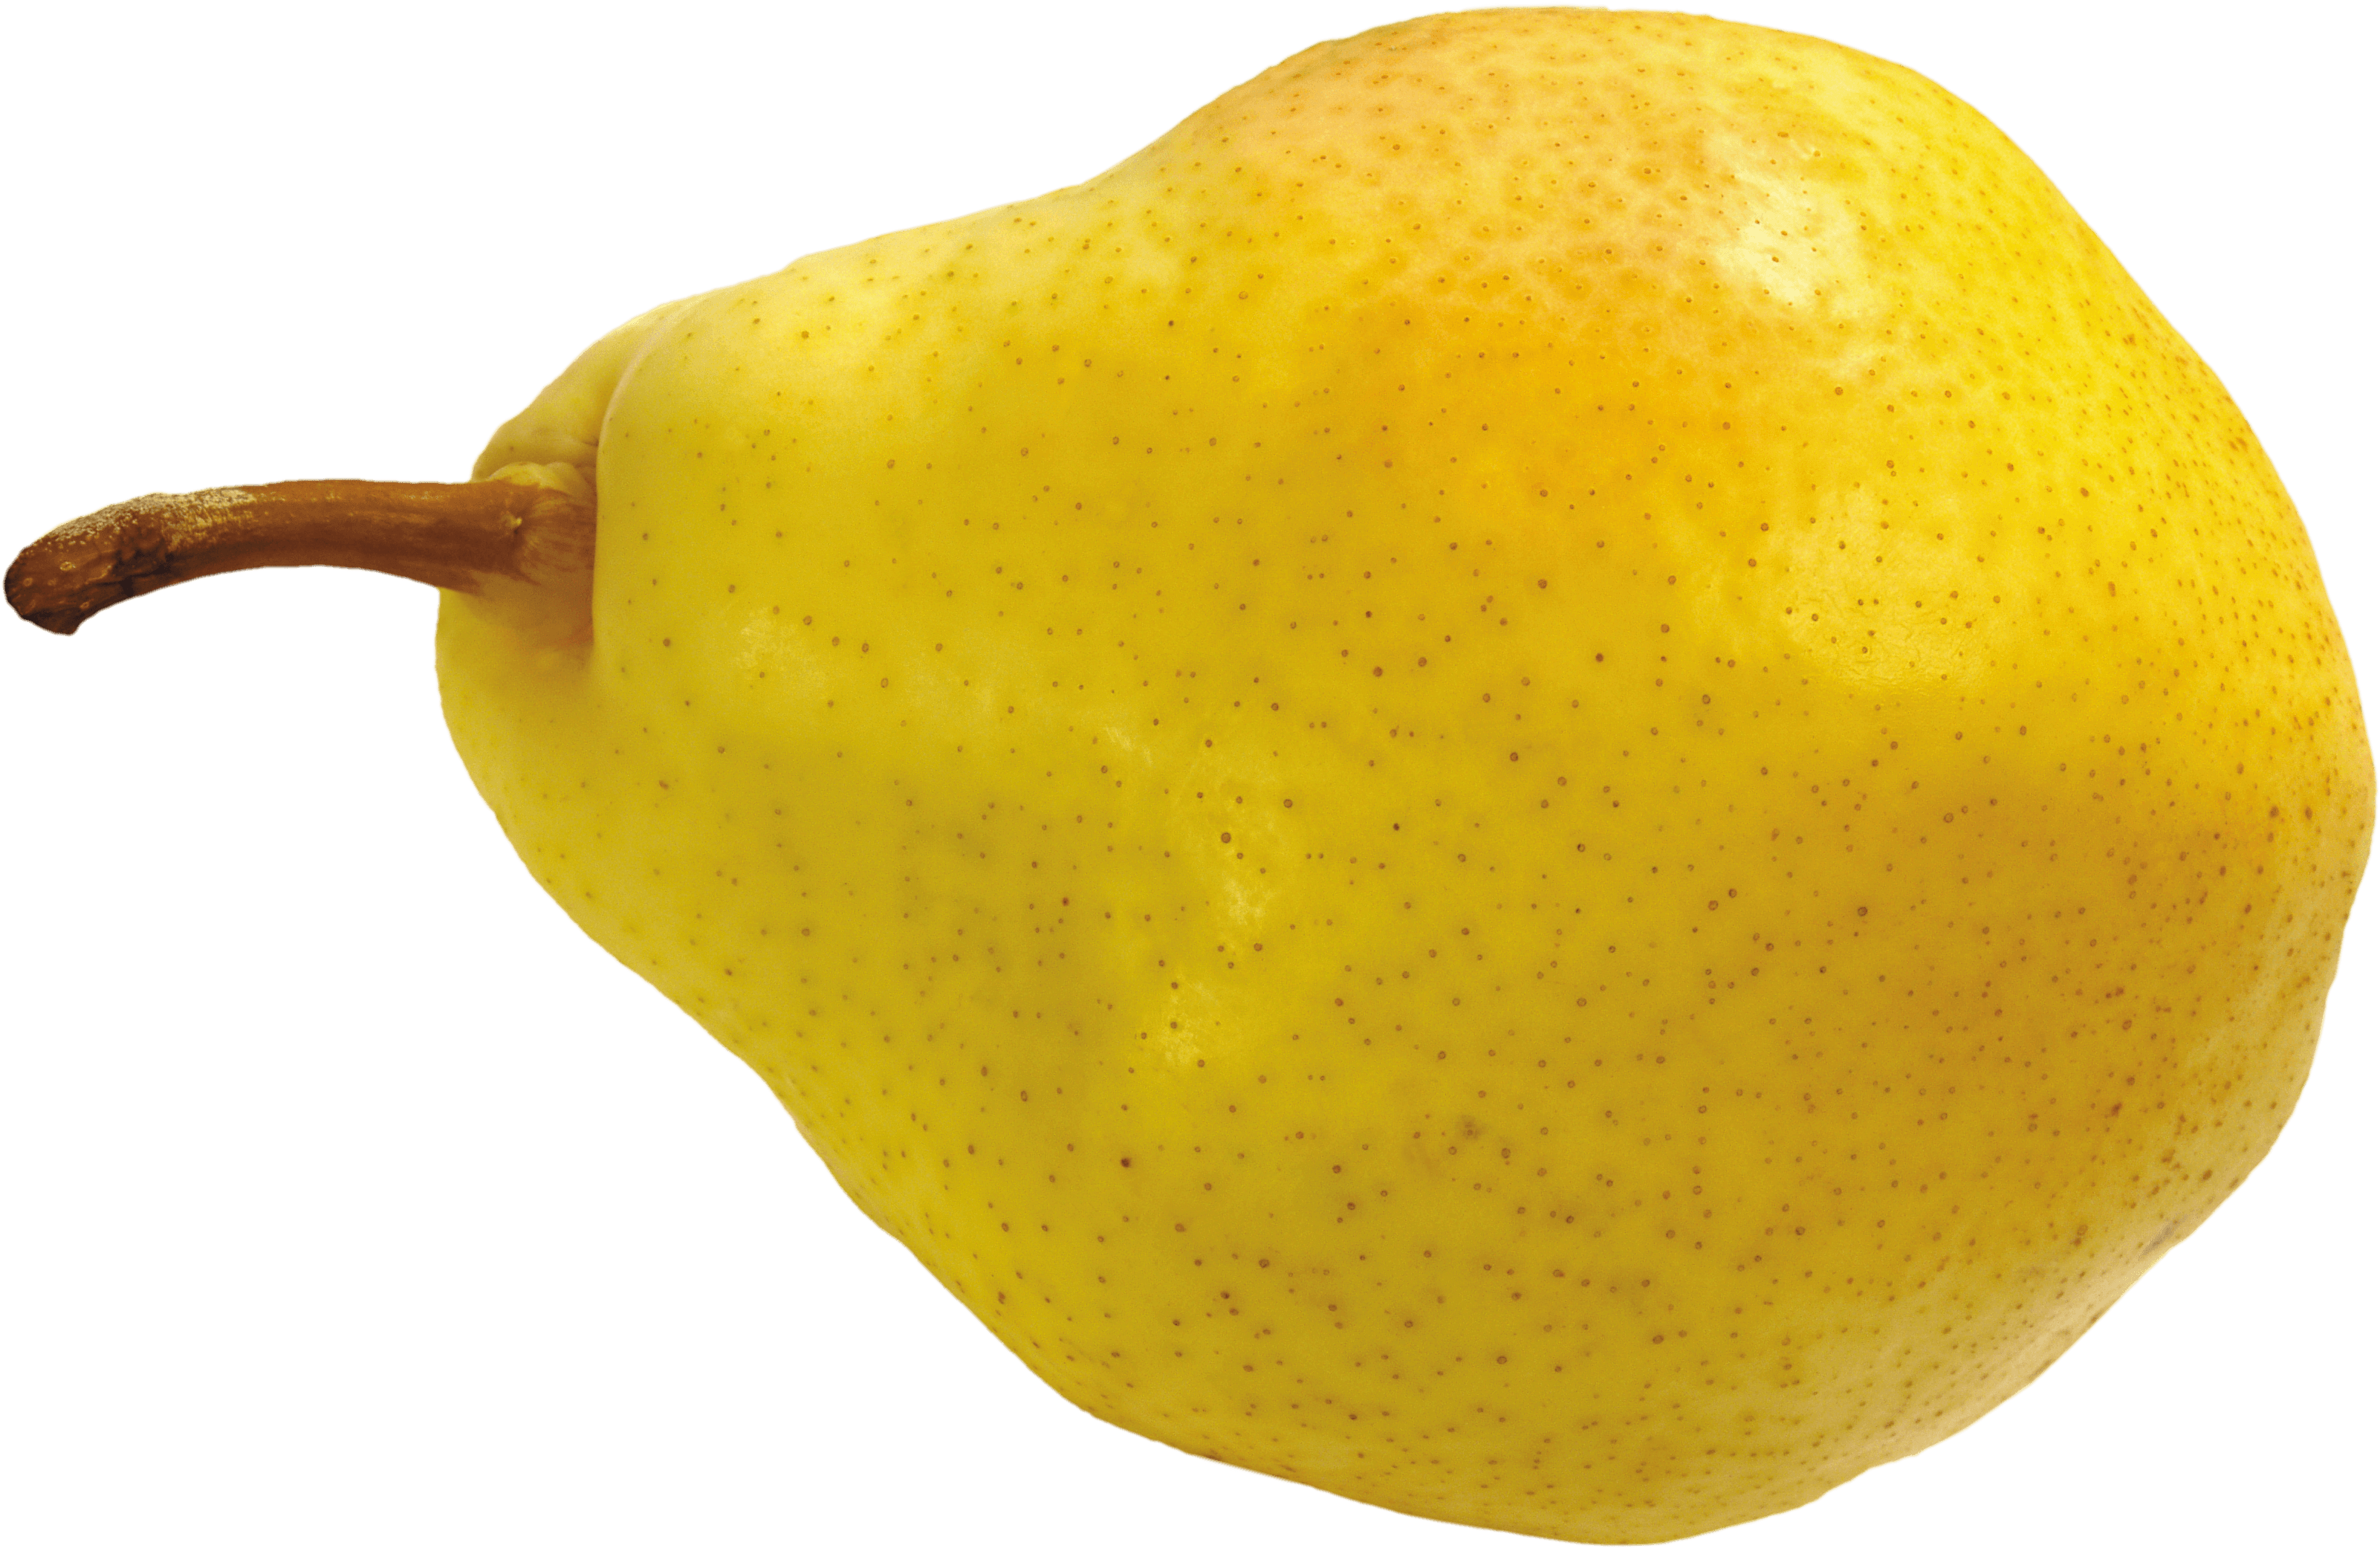 Pear Png Image PNG Image